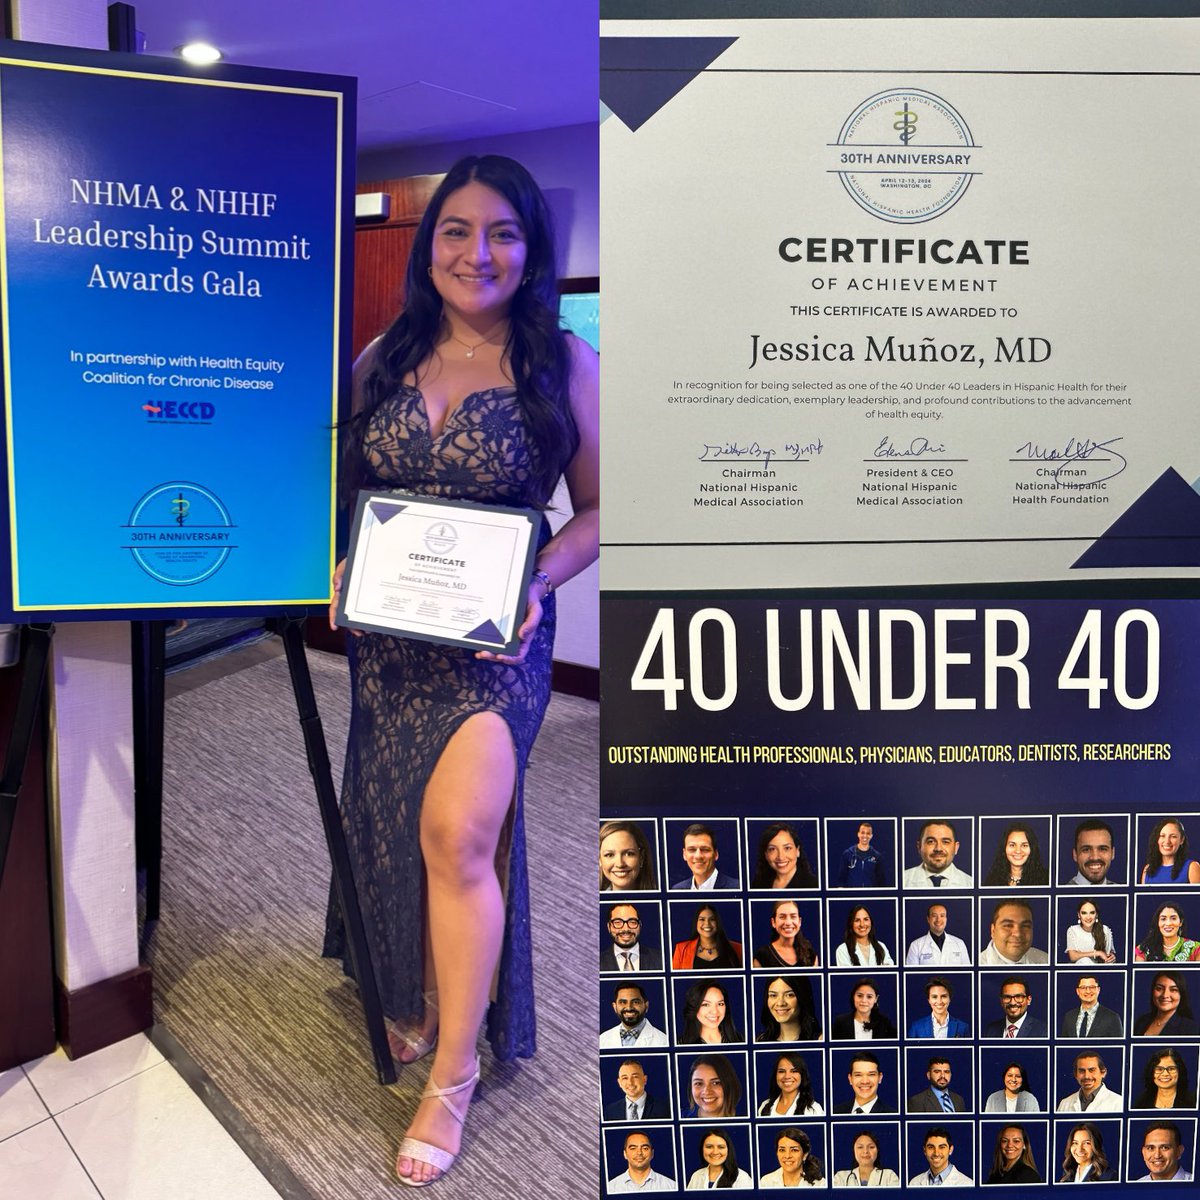 Extremely honored to be selected as one of the 40 Under 40 Leaders in Hispanic Health. We are being honored for extraordinary dedication, exemplary leadership, and profound contributions to the advancement of health equity. Congrats to all my colleagues @NHMAmd @The_NHHF